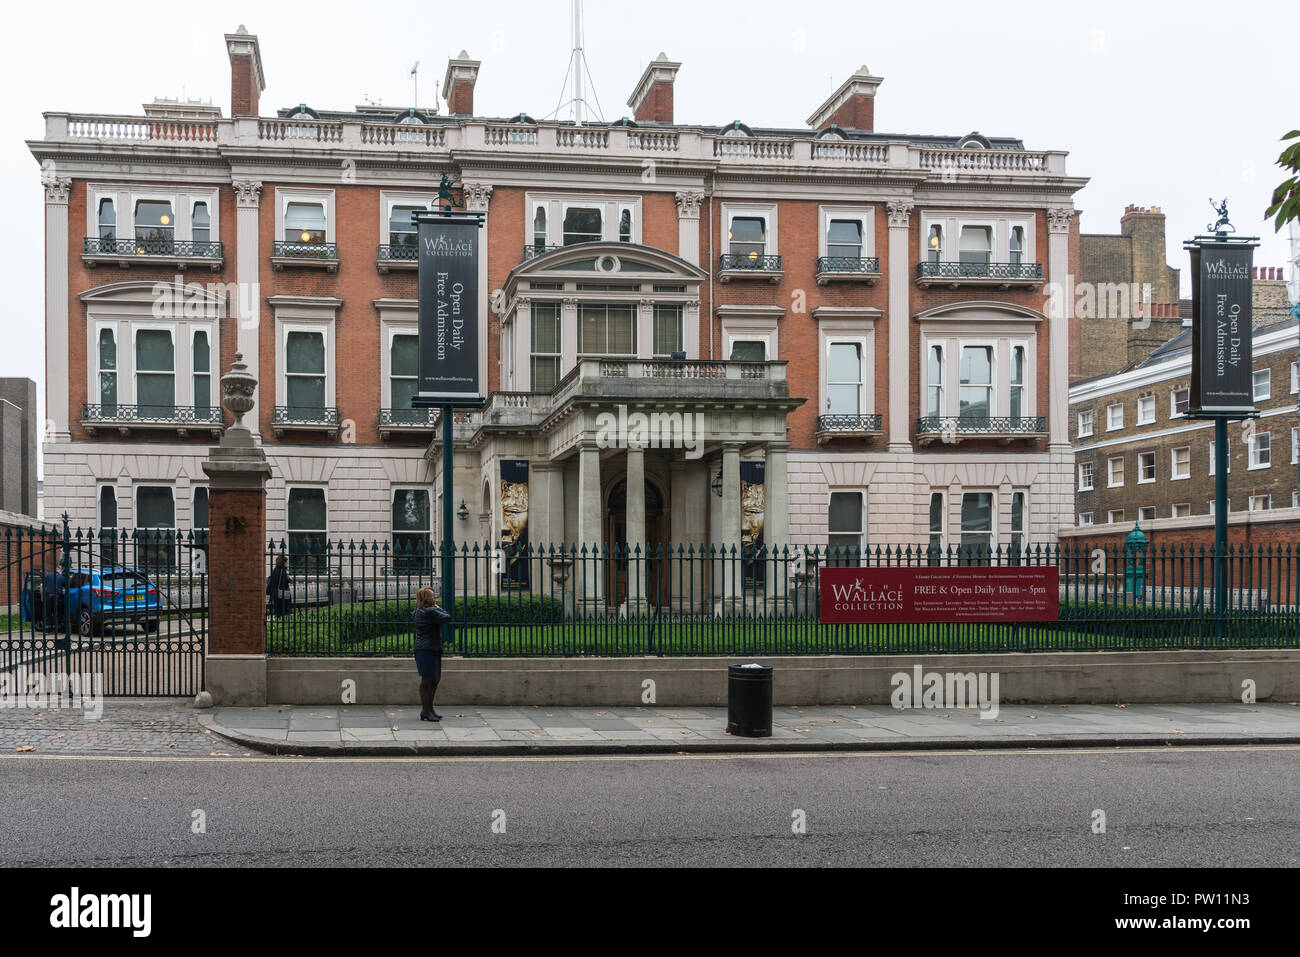 Hertford House, the home of the Wallace Collection, Manchester Square, London, England, UK Stock Photo